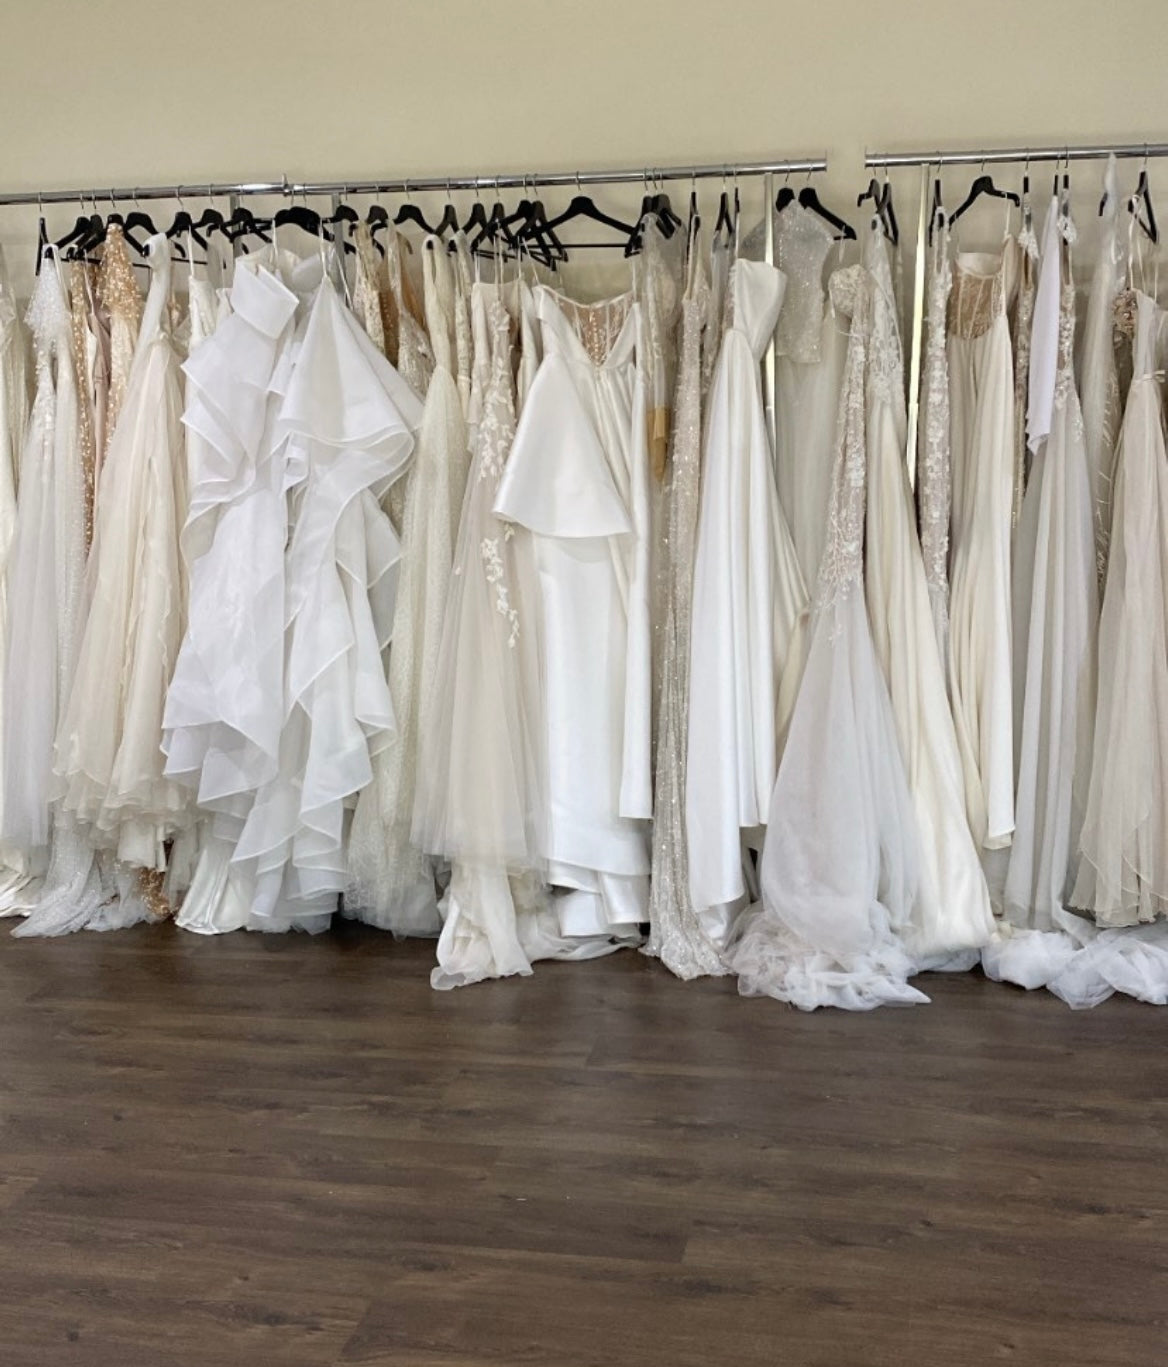 bridal studio with racks full of wedding gowns against white wall with wooden floors